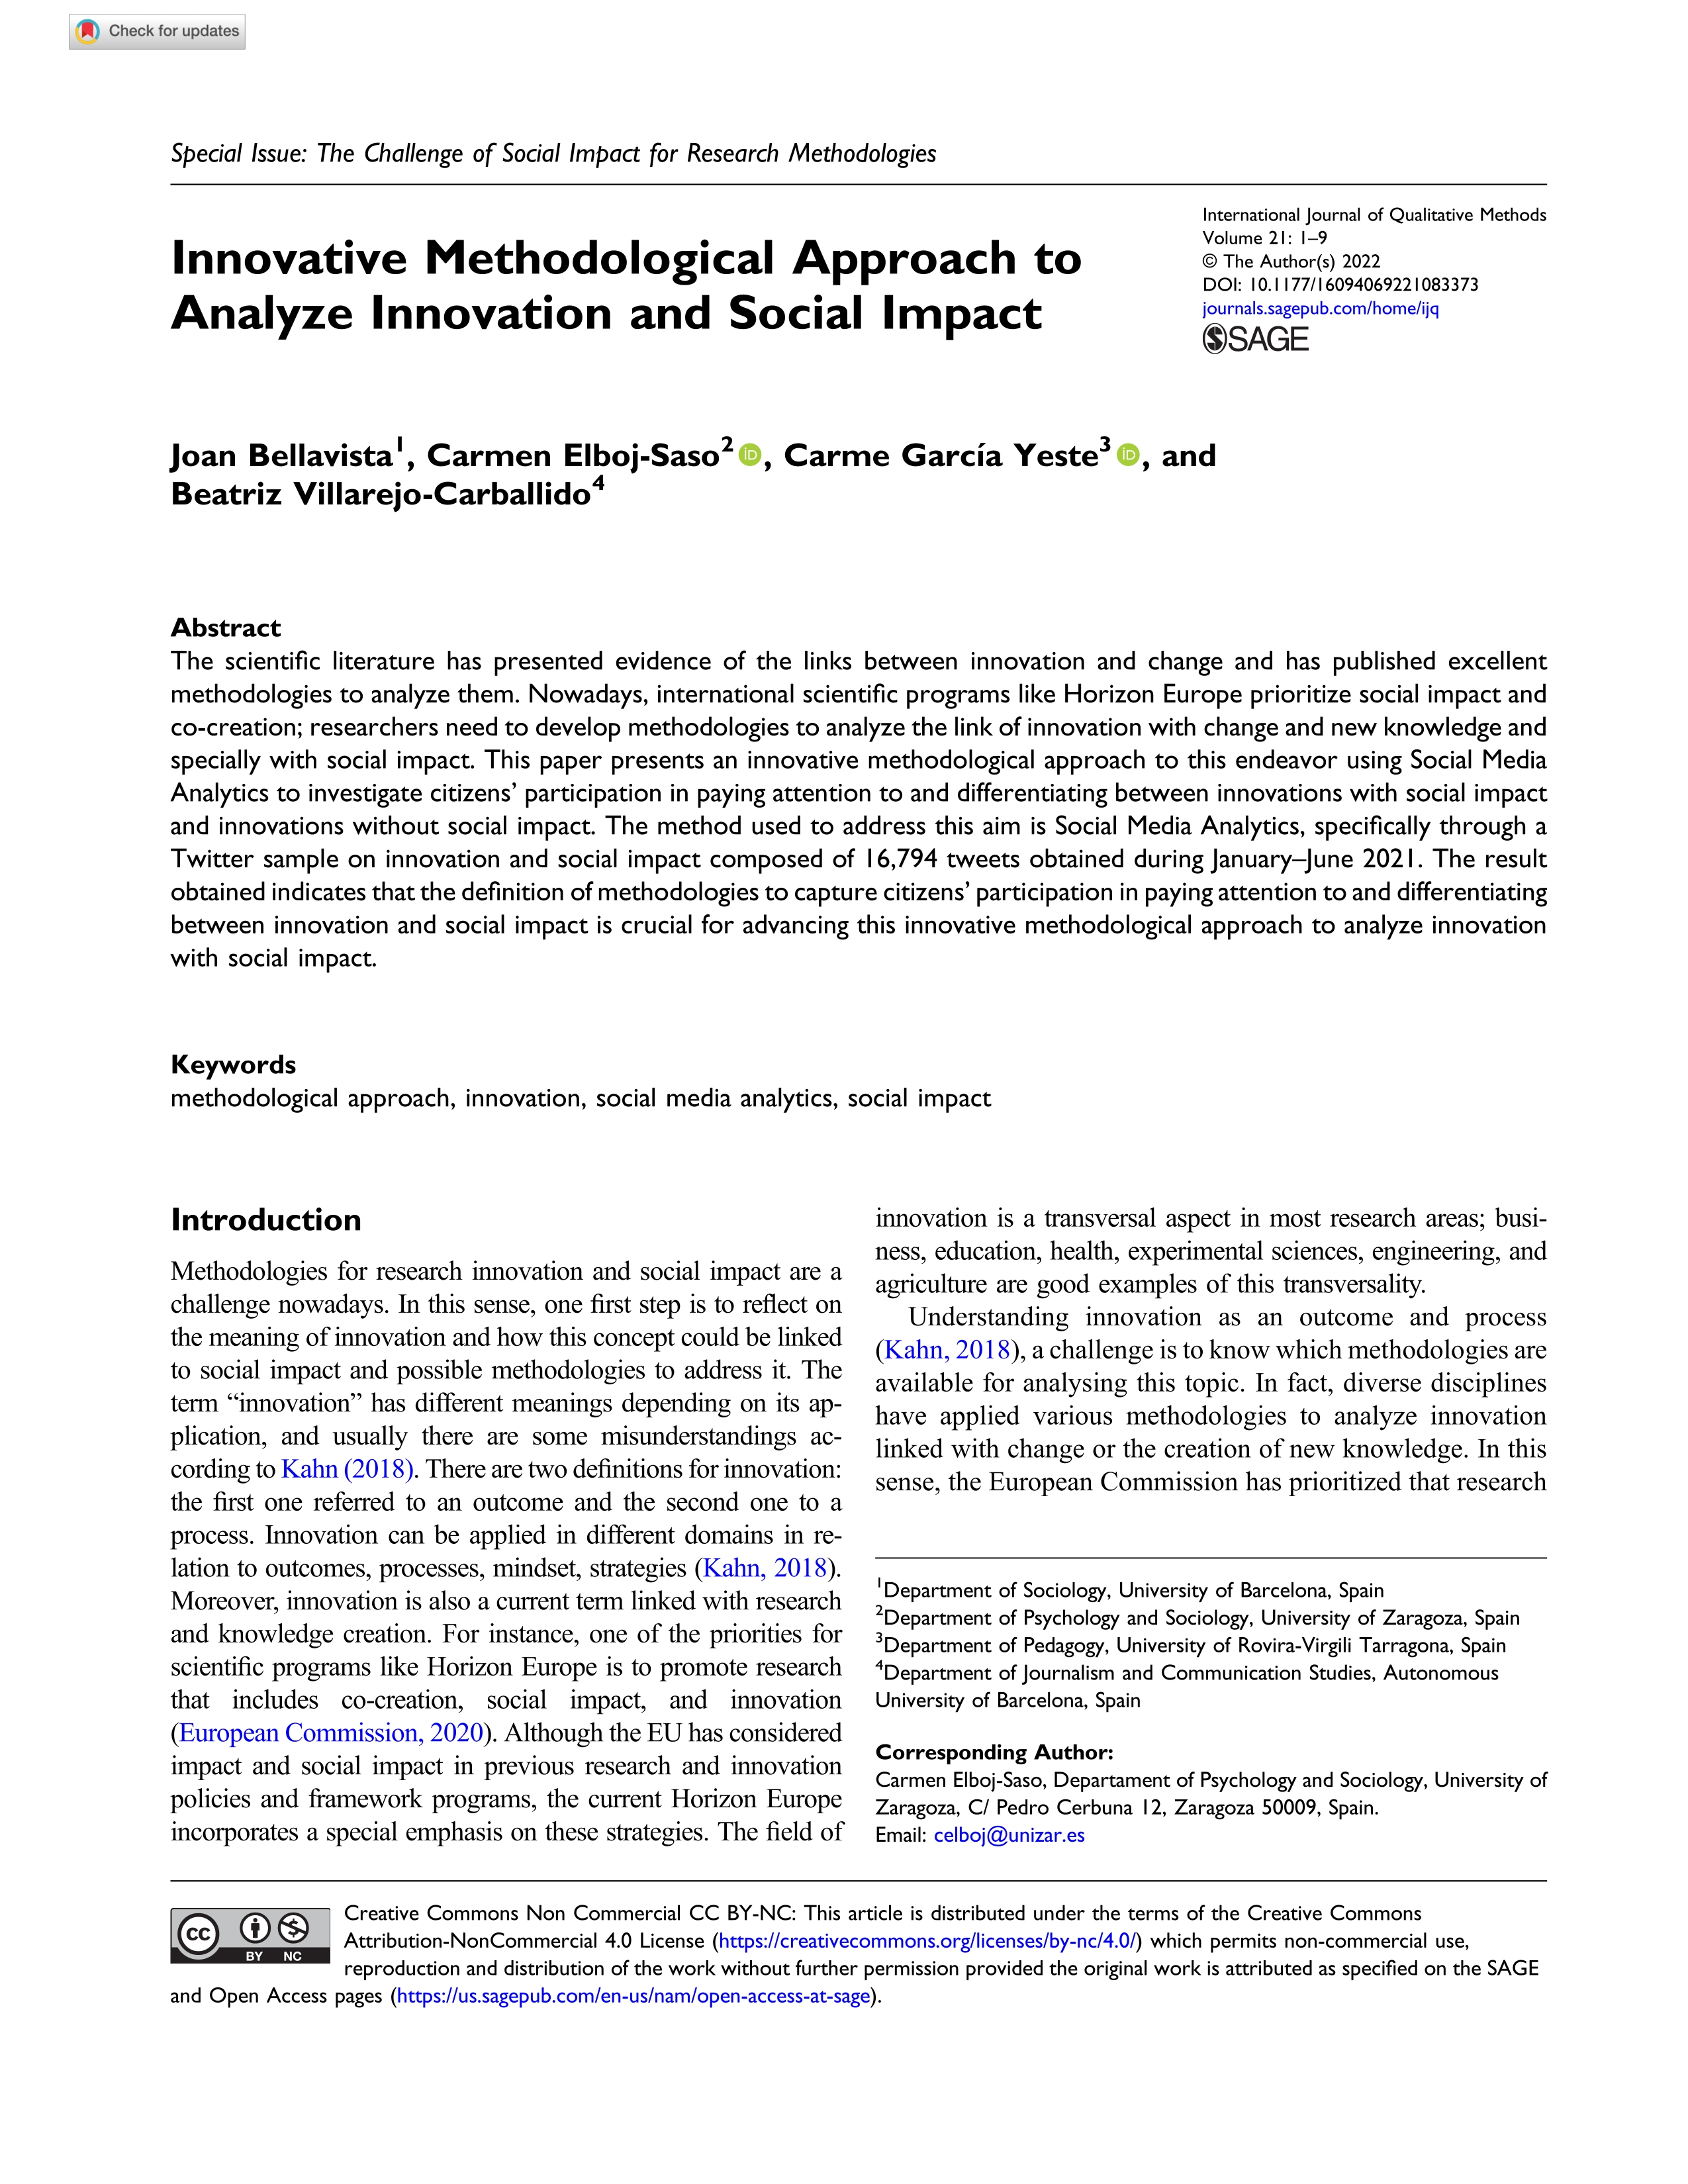 Innovative methodological approach to analyze innovation and social impact